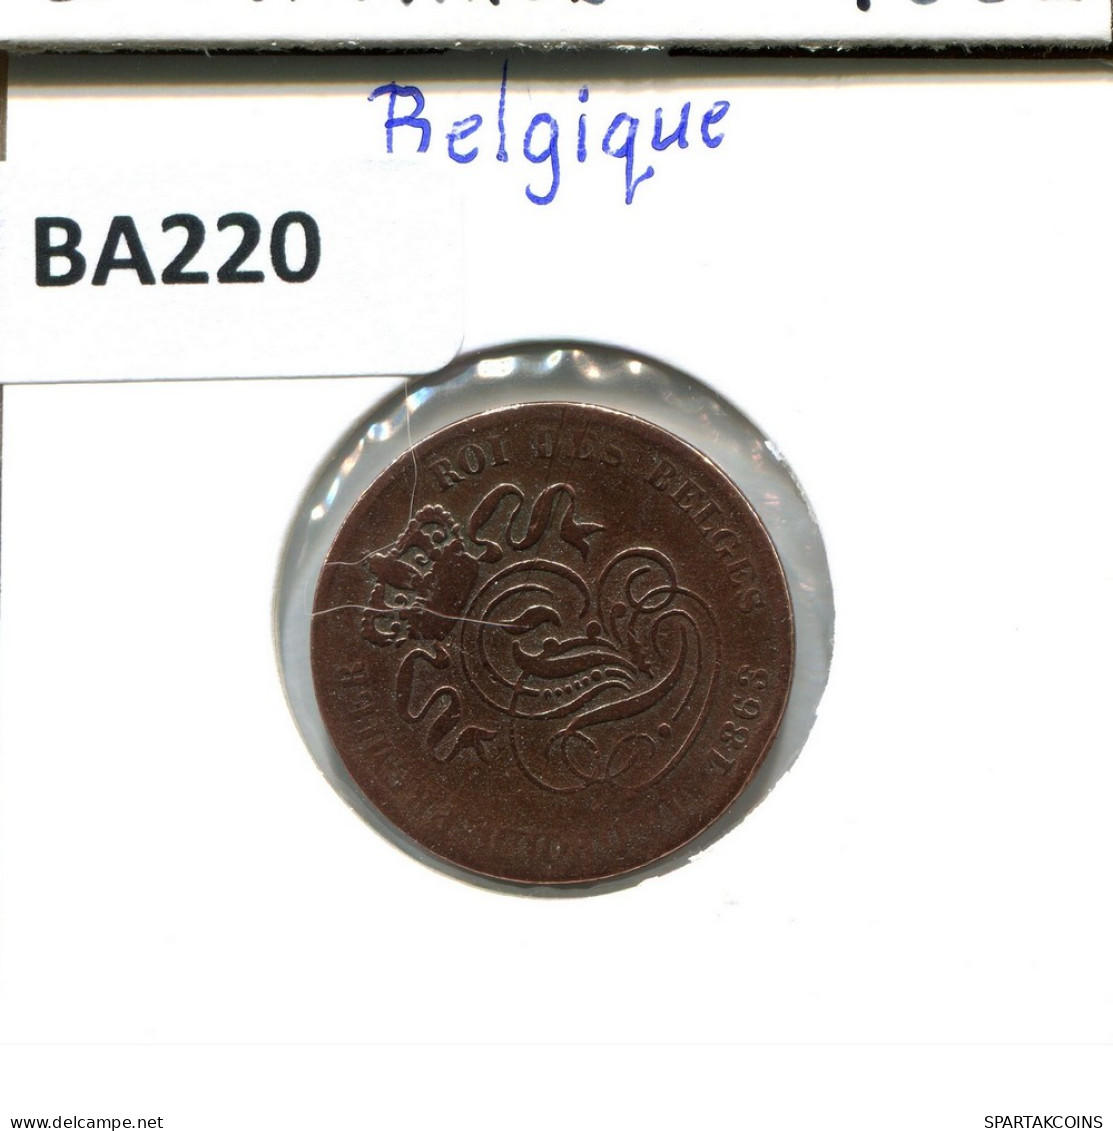 2 CENTIMES 1863 FRENCH Text BELGIUM Coin #BA220.U - 2 Cent